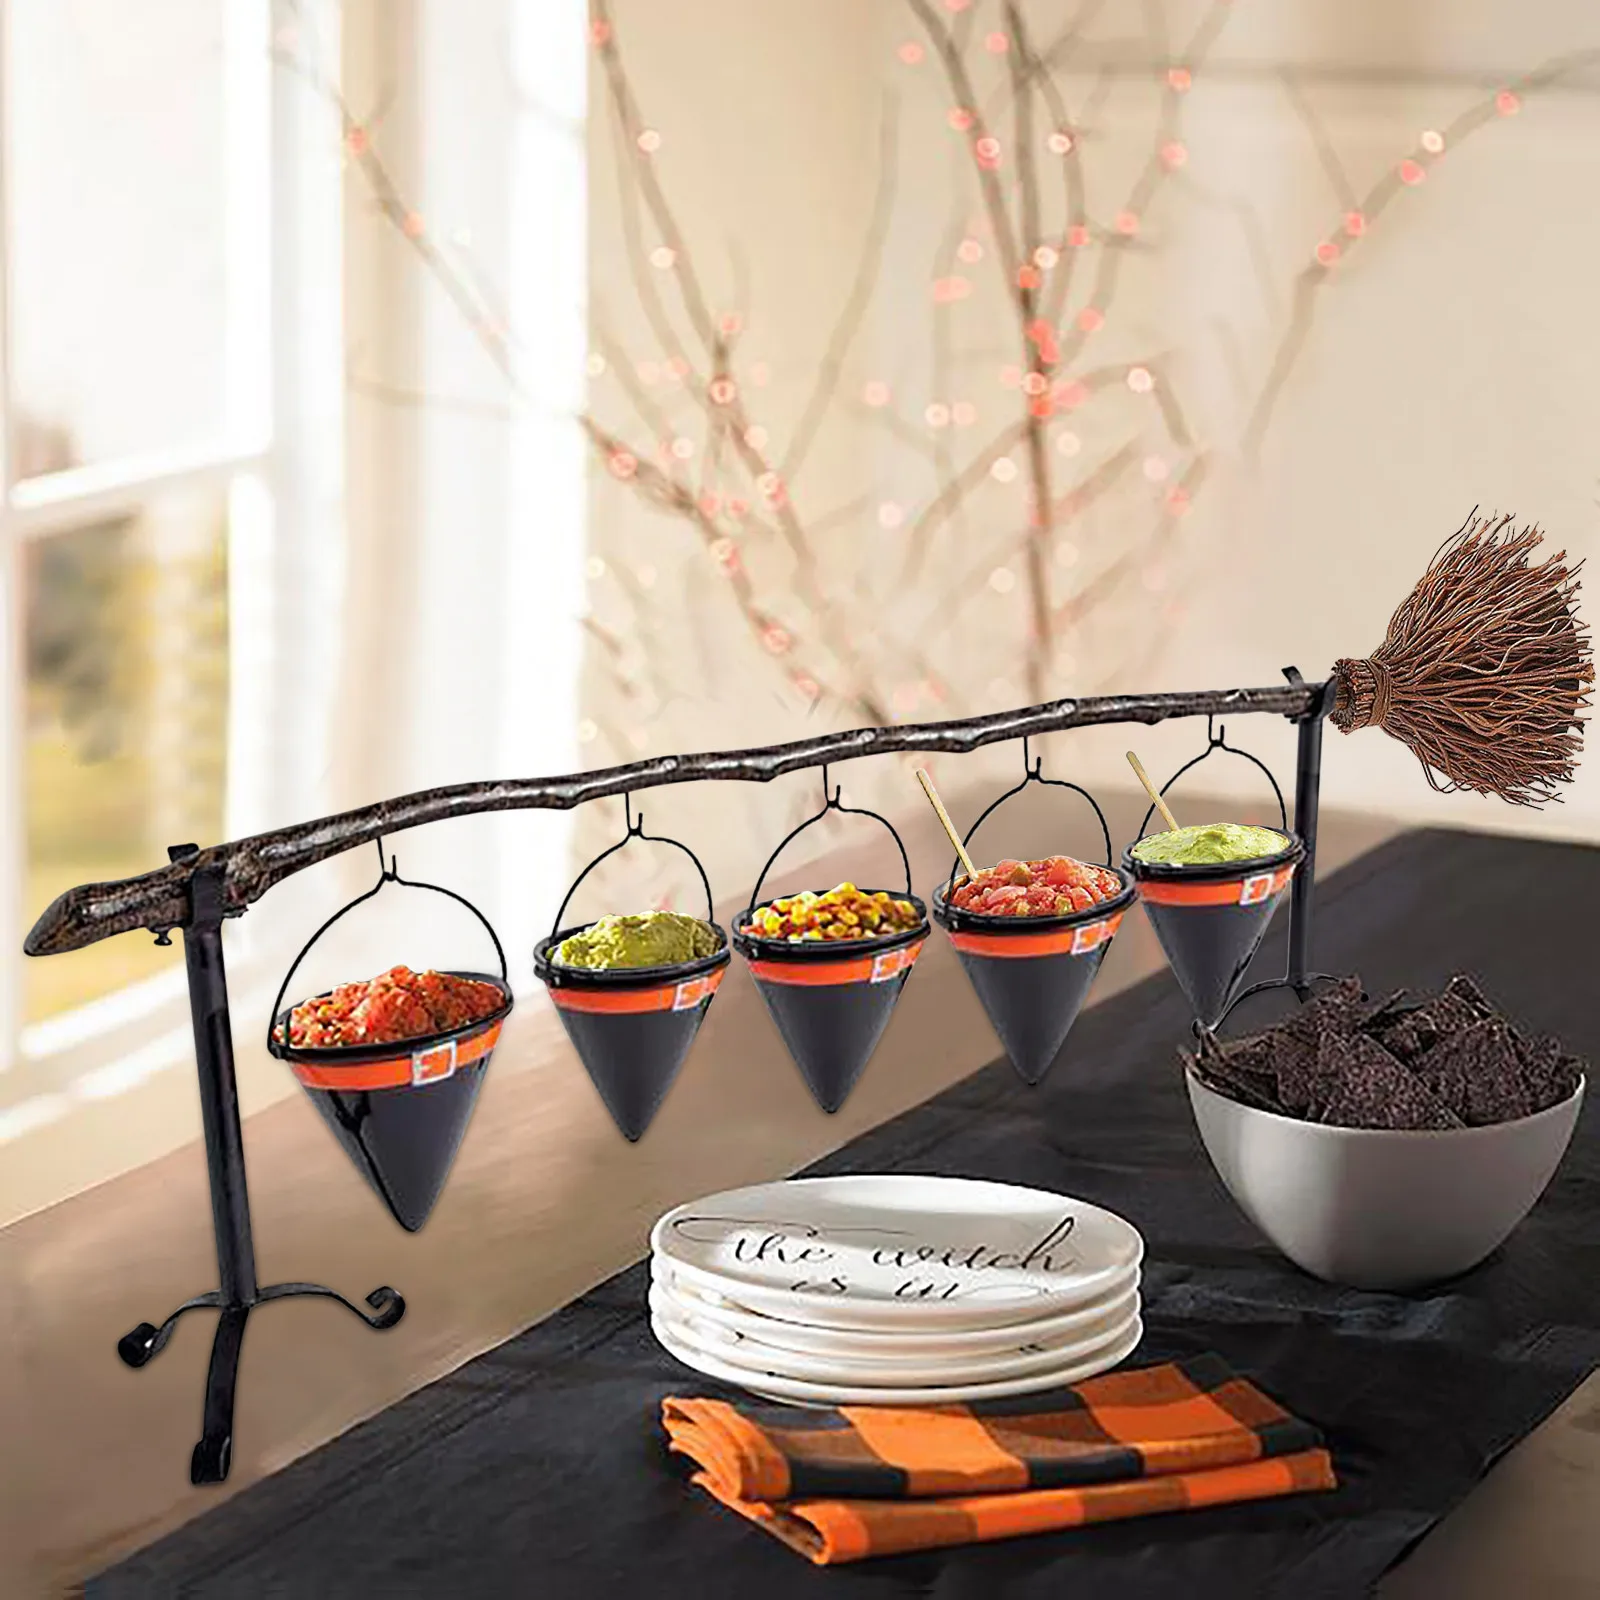 A+C Broomstick Snack Bowl Stand with Removable Basket Organizer Broom Stick Snack Bowl Stand Hocus Pocus Snack Bowl Stand Halloween Witch Hat Snack Bowl Stand Broom Pumpkin Snack Bowl Rack 